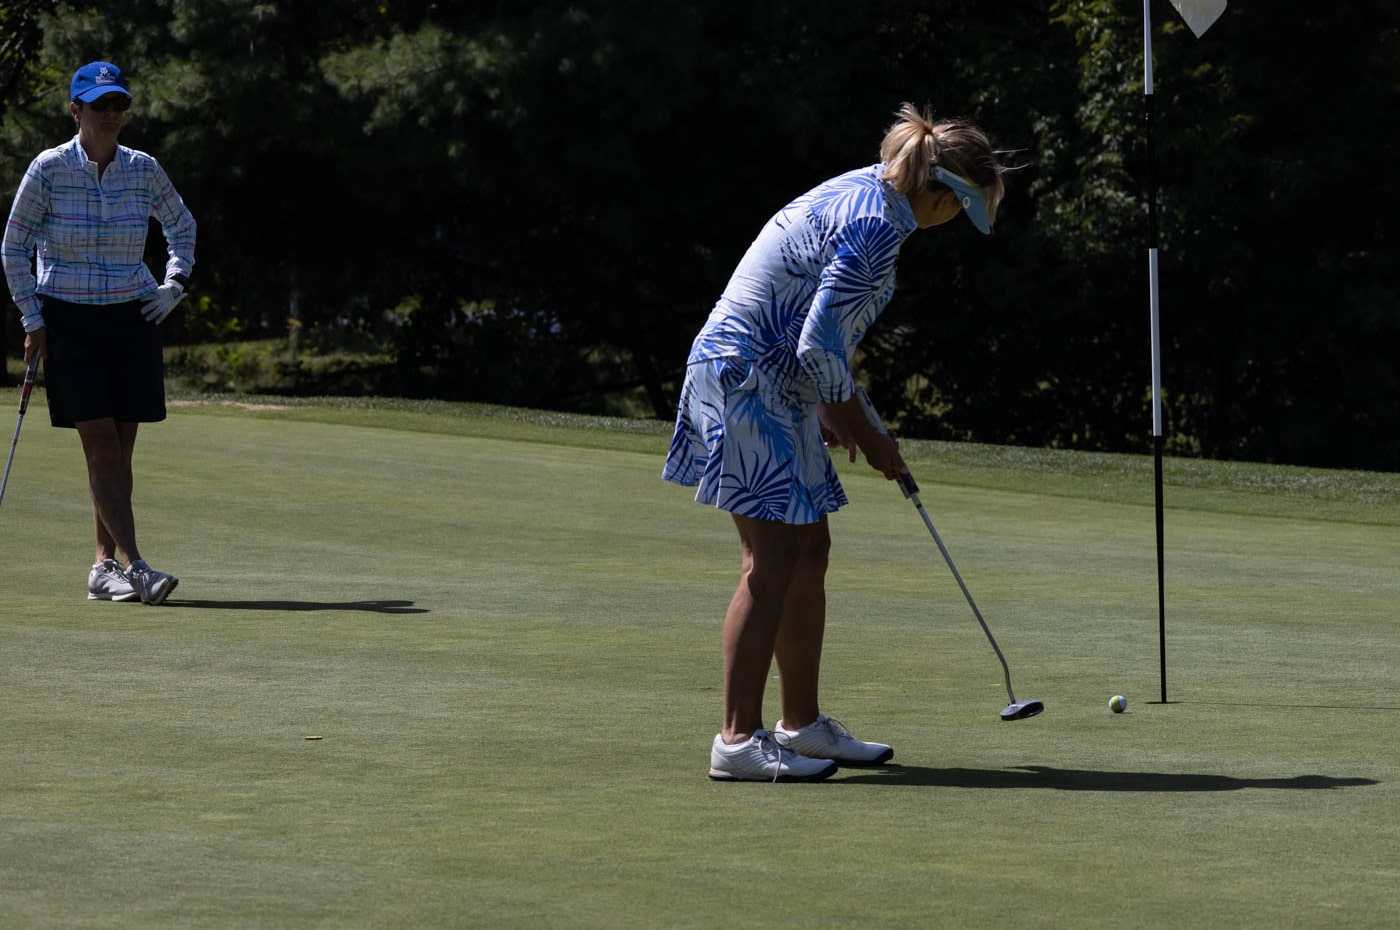 Country-Club-Of-New-Bedford FB-2023-Womens-FB-Gallery August-2023-Country-Club-Of-New-Bedford-FB-2023-Womens-FB-Gallery August-2023-Womens-FB-Gallery-Thursday-Photos-Image-47